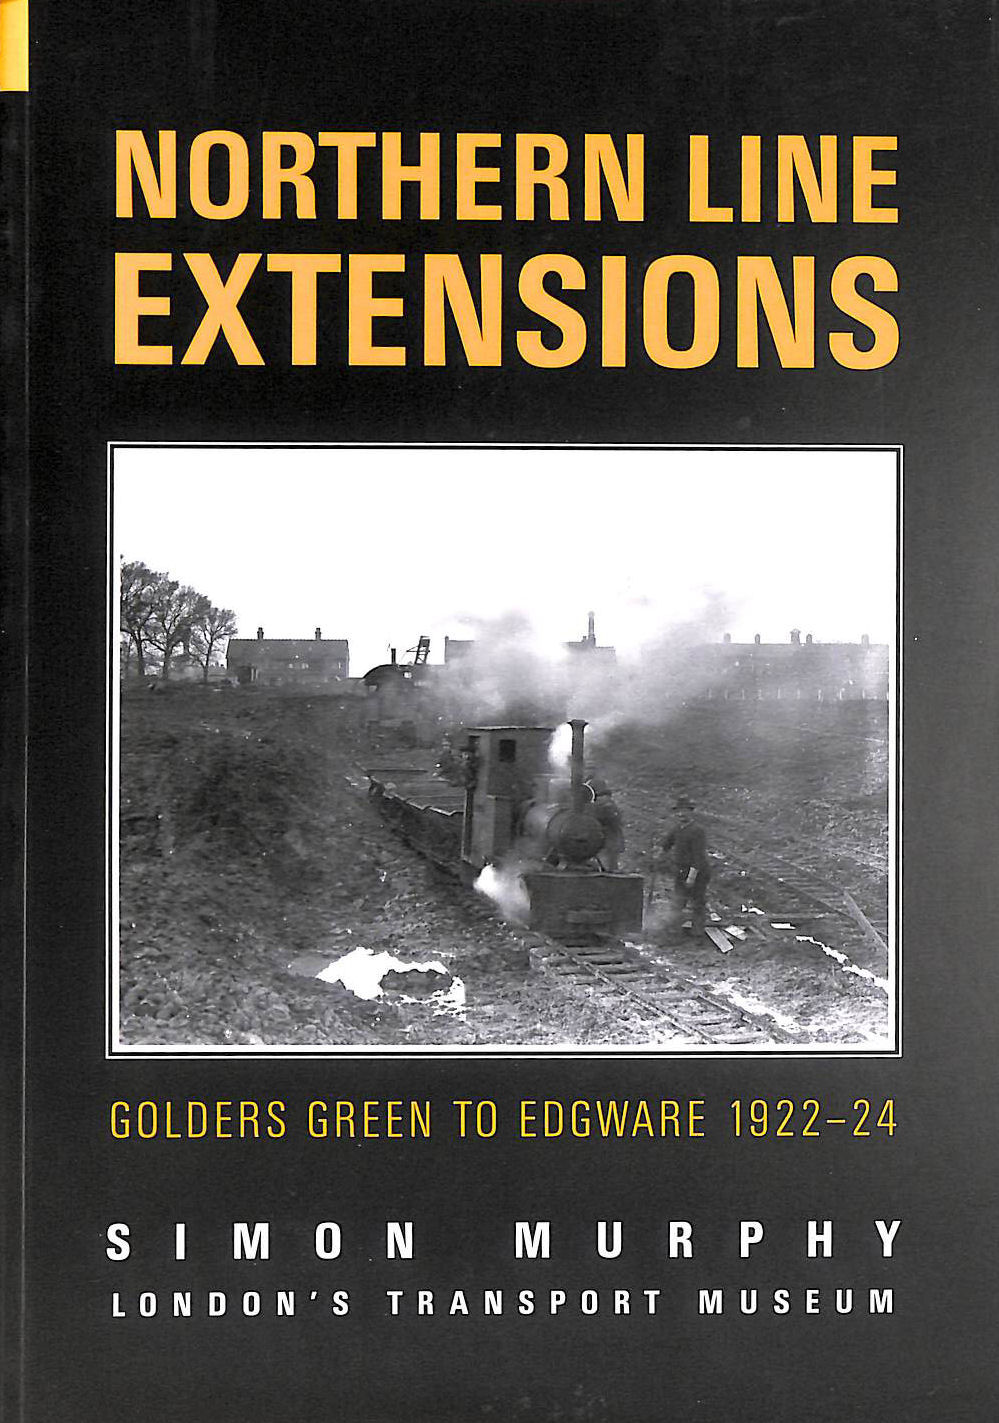 SIMON MURPHY - Northern Line Extensions Golders Green to Edgware 1922 - 24